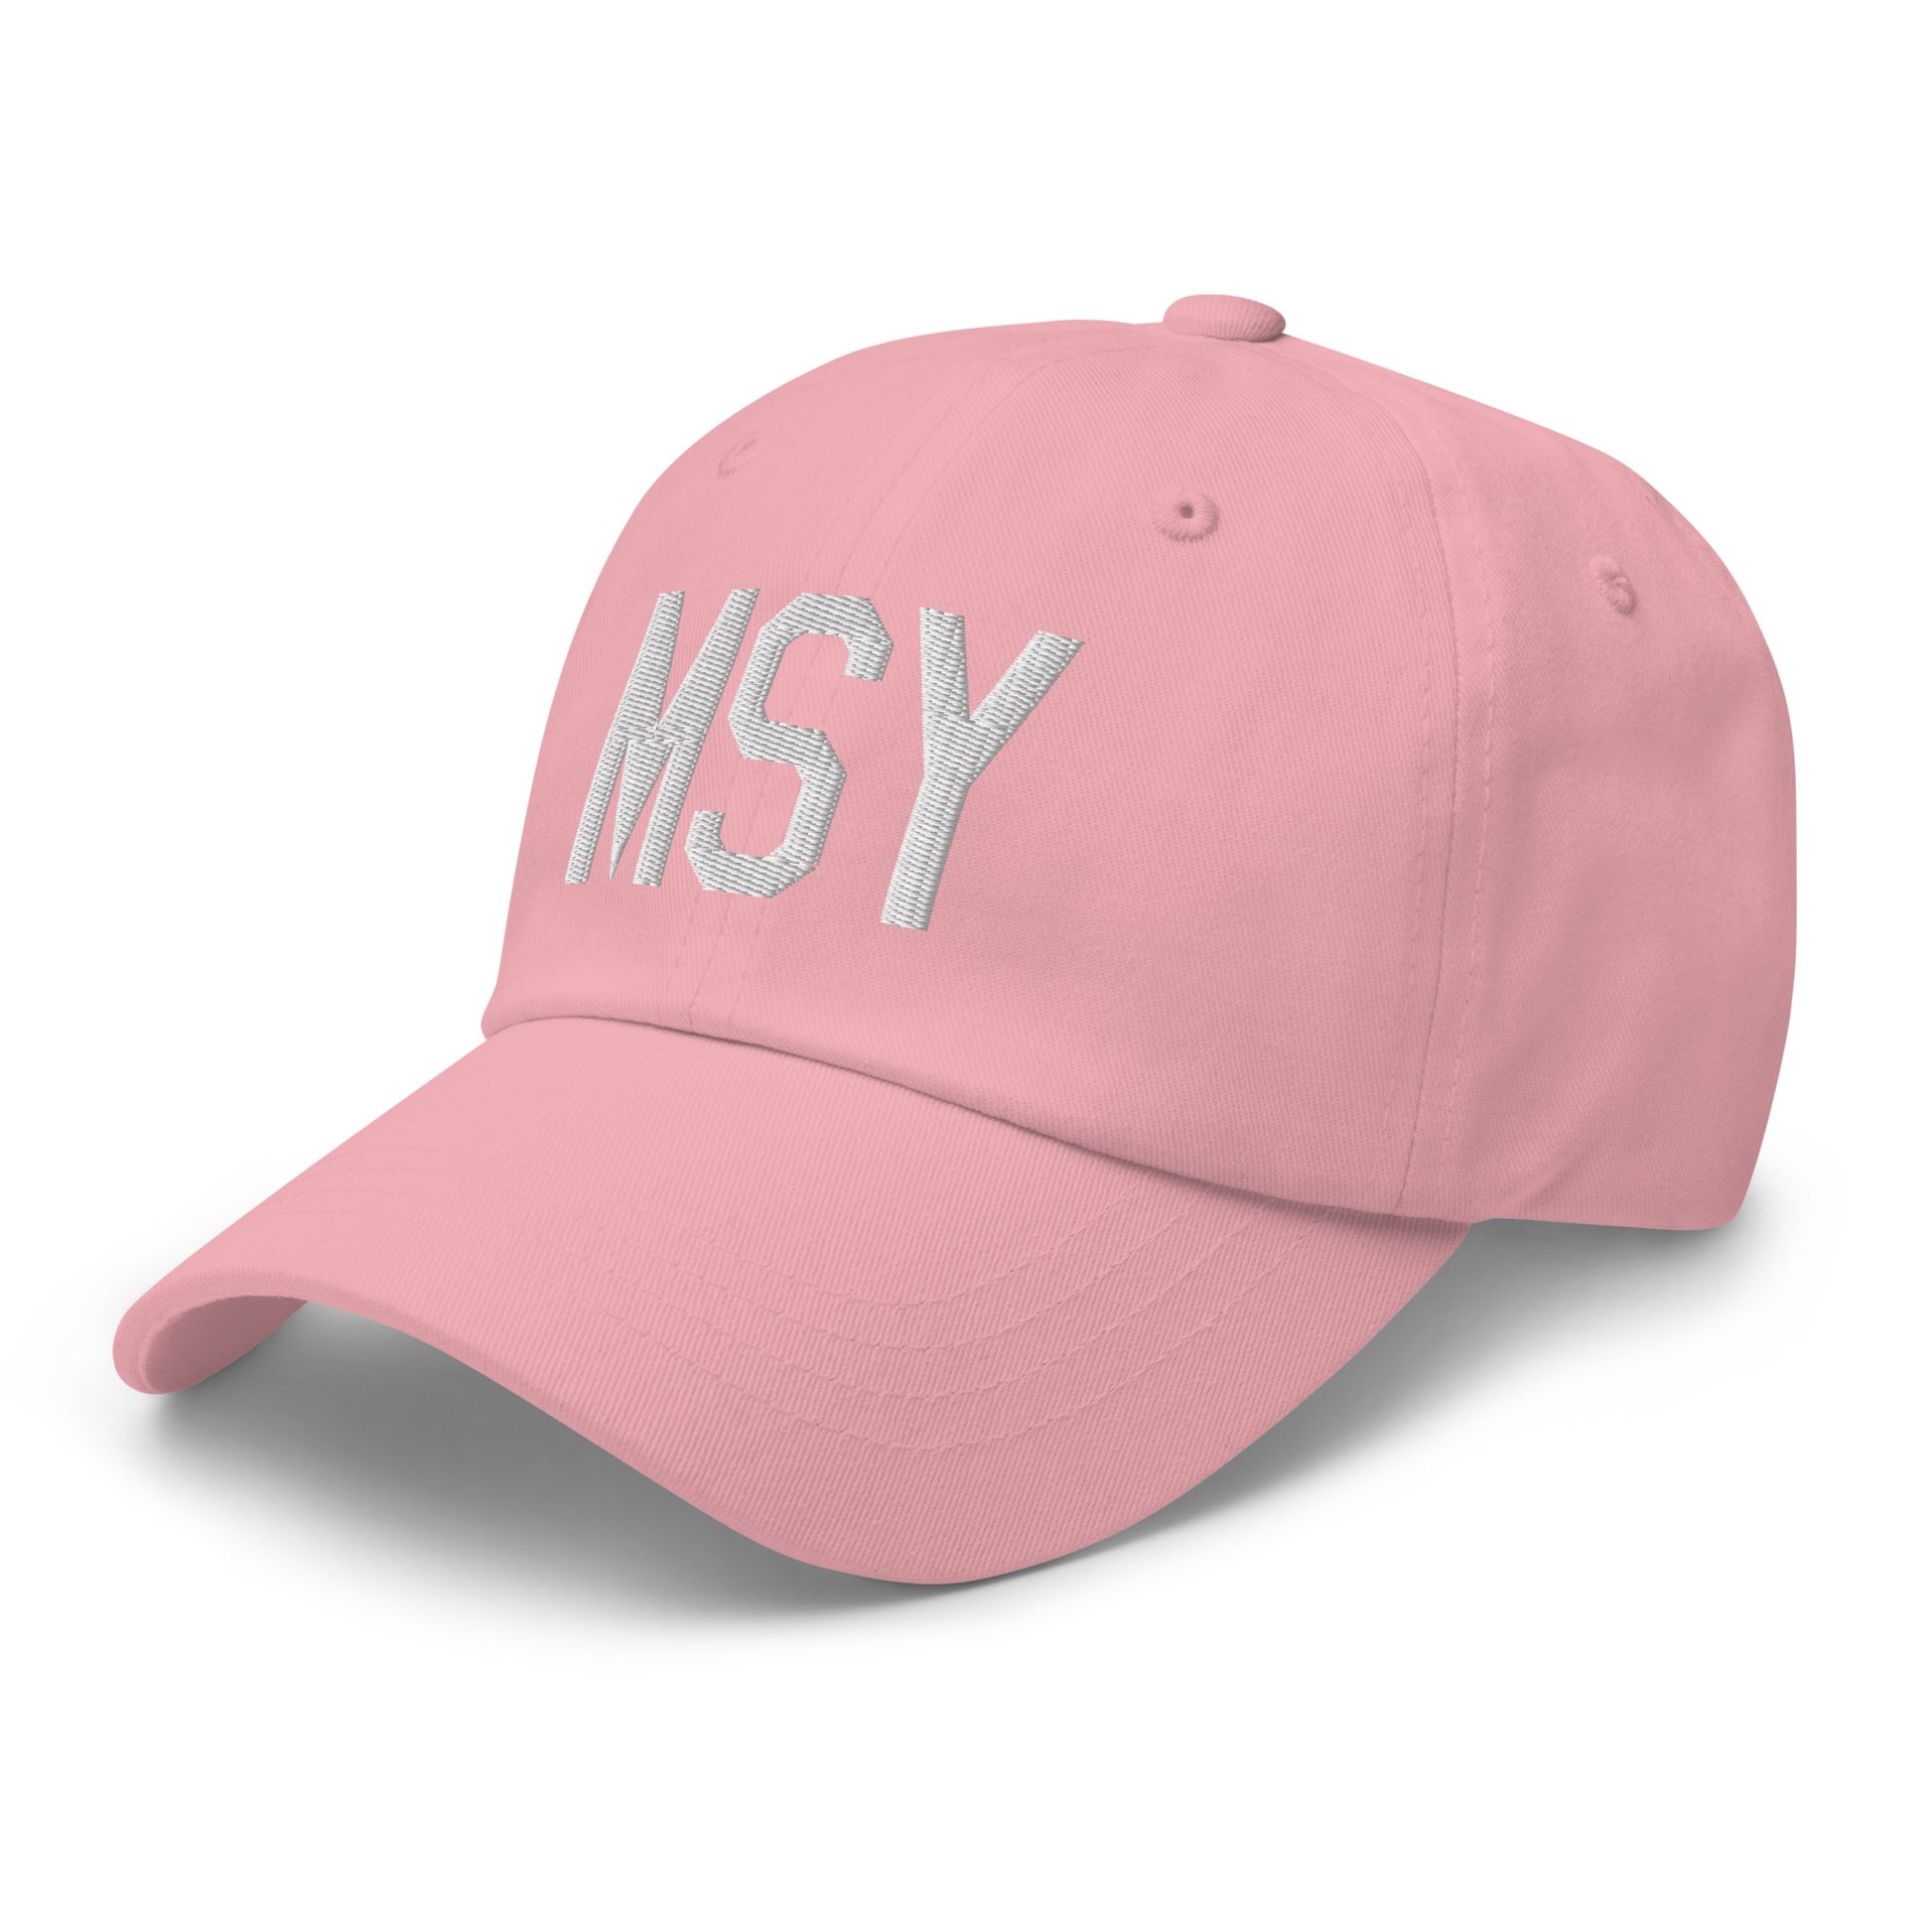 Airport Code Baseball Cap - White • MSY New Orleans • YHM Designs - Image 27